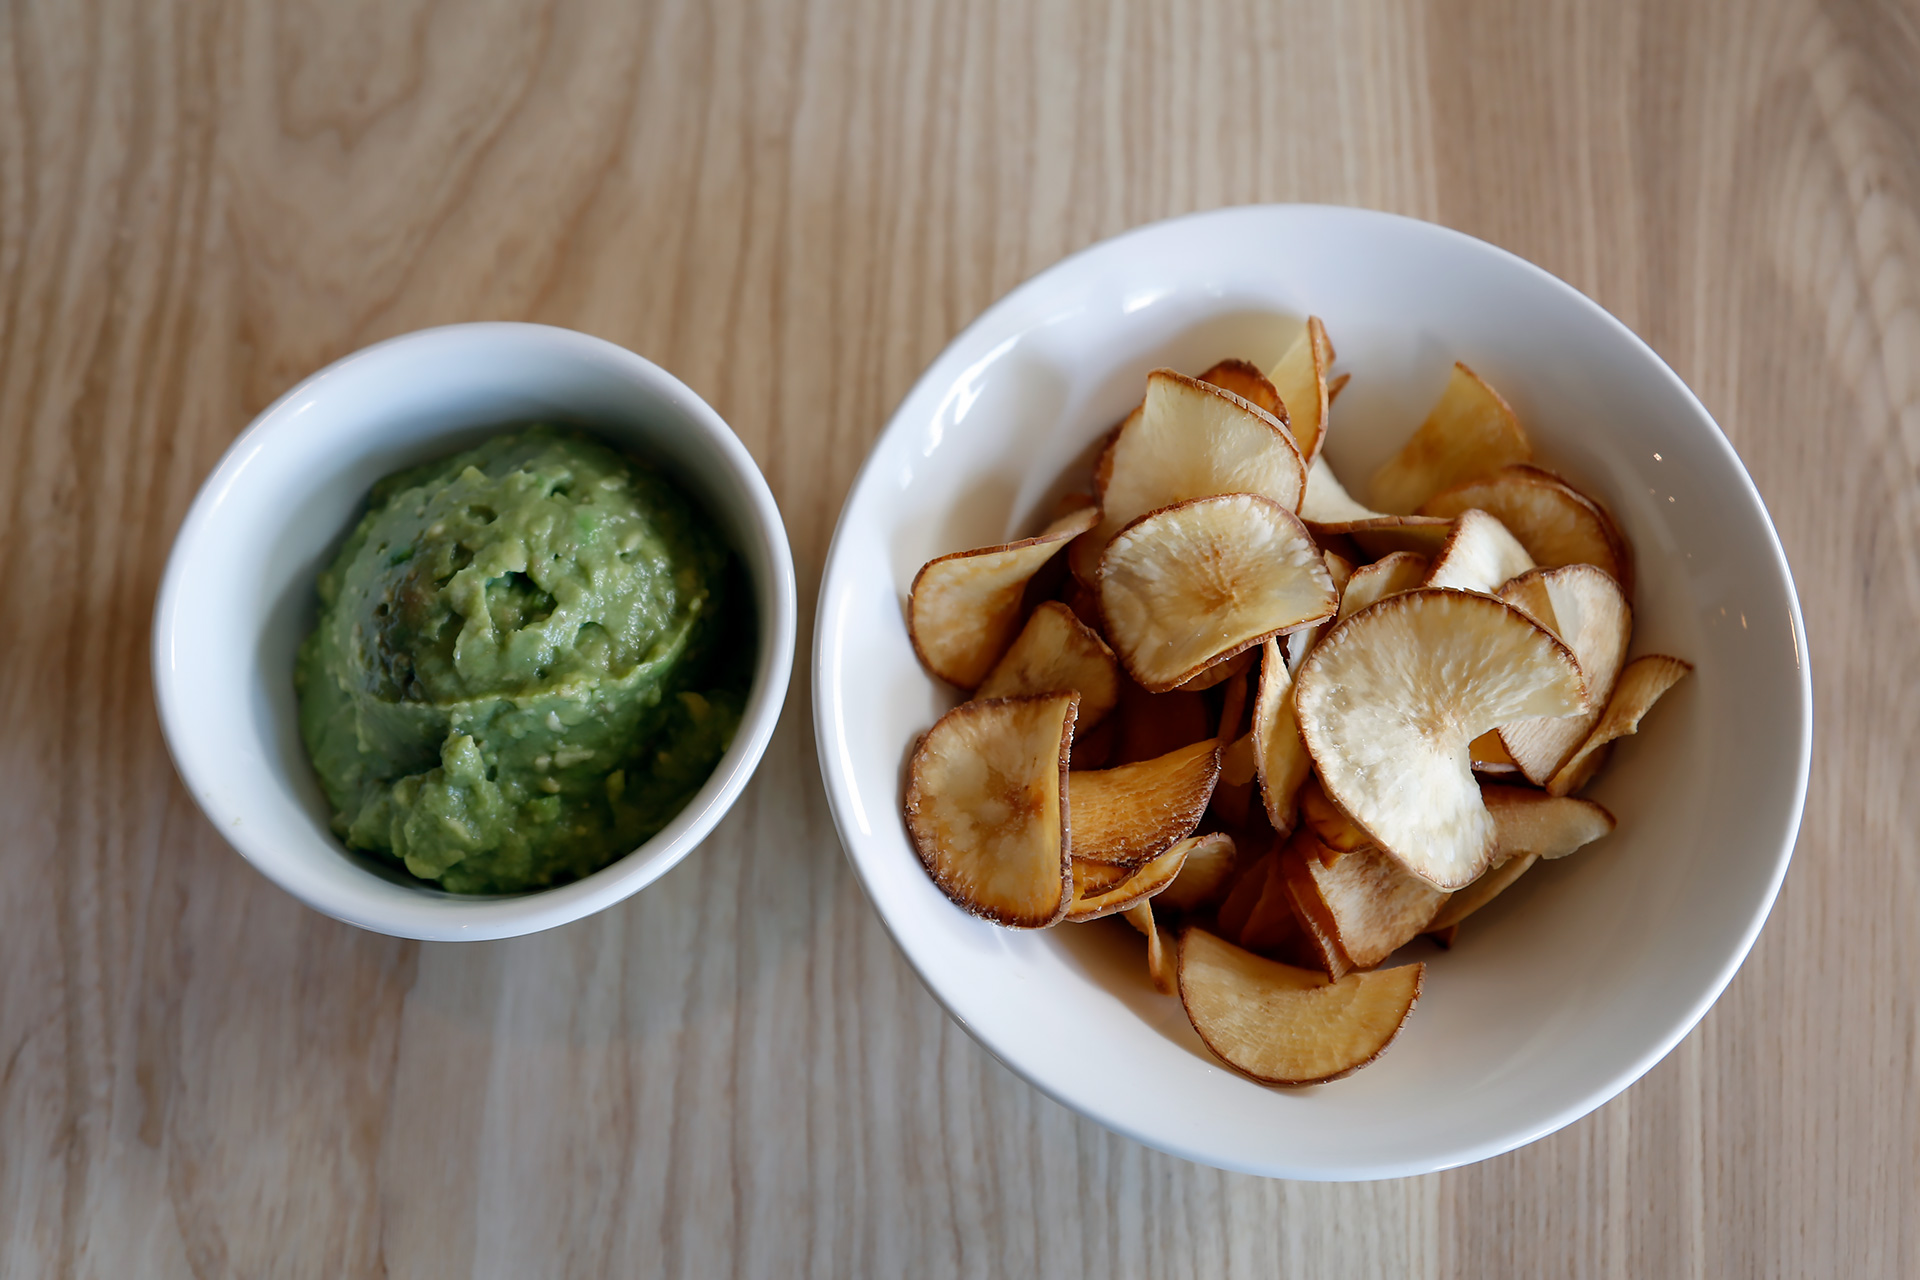 Avocado mash with yucca chips.